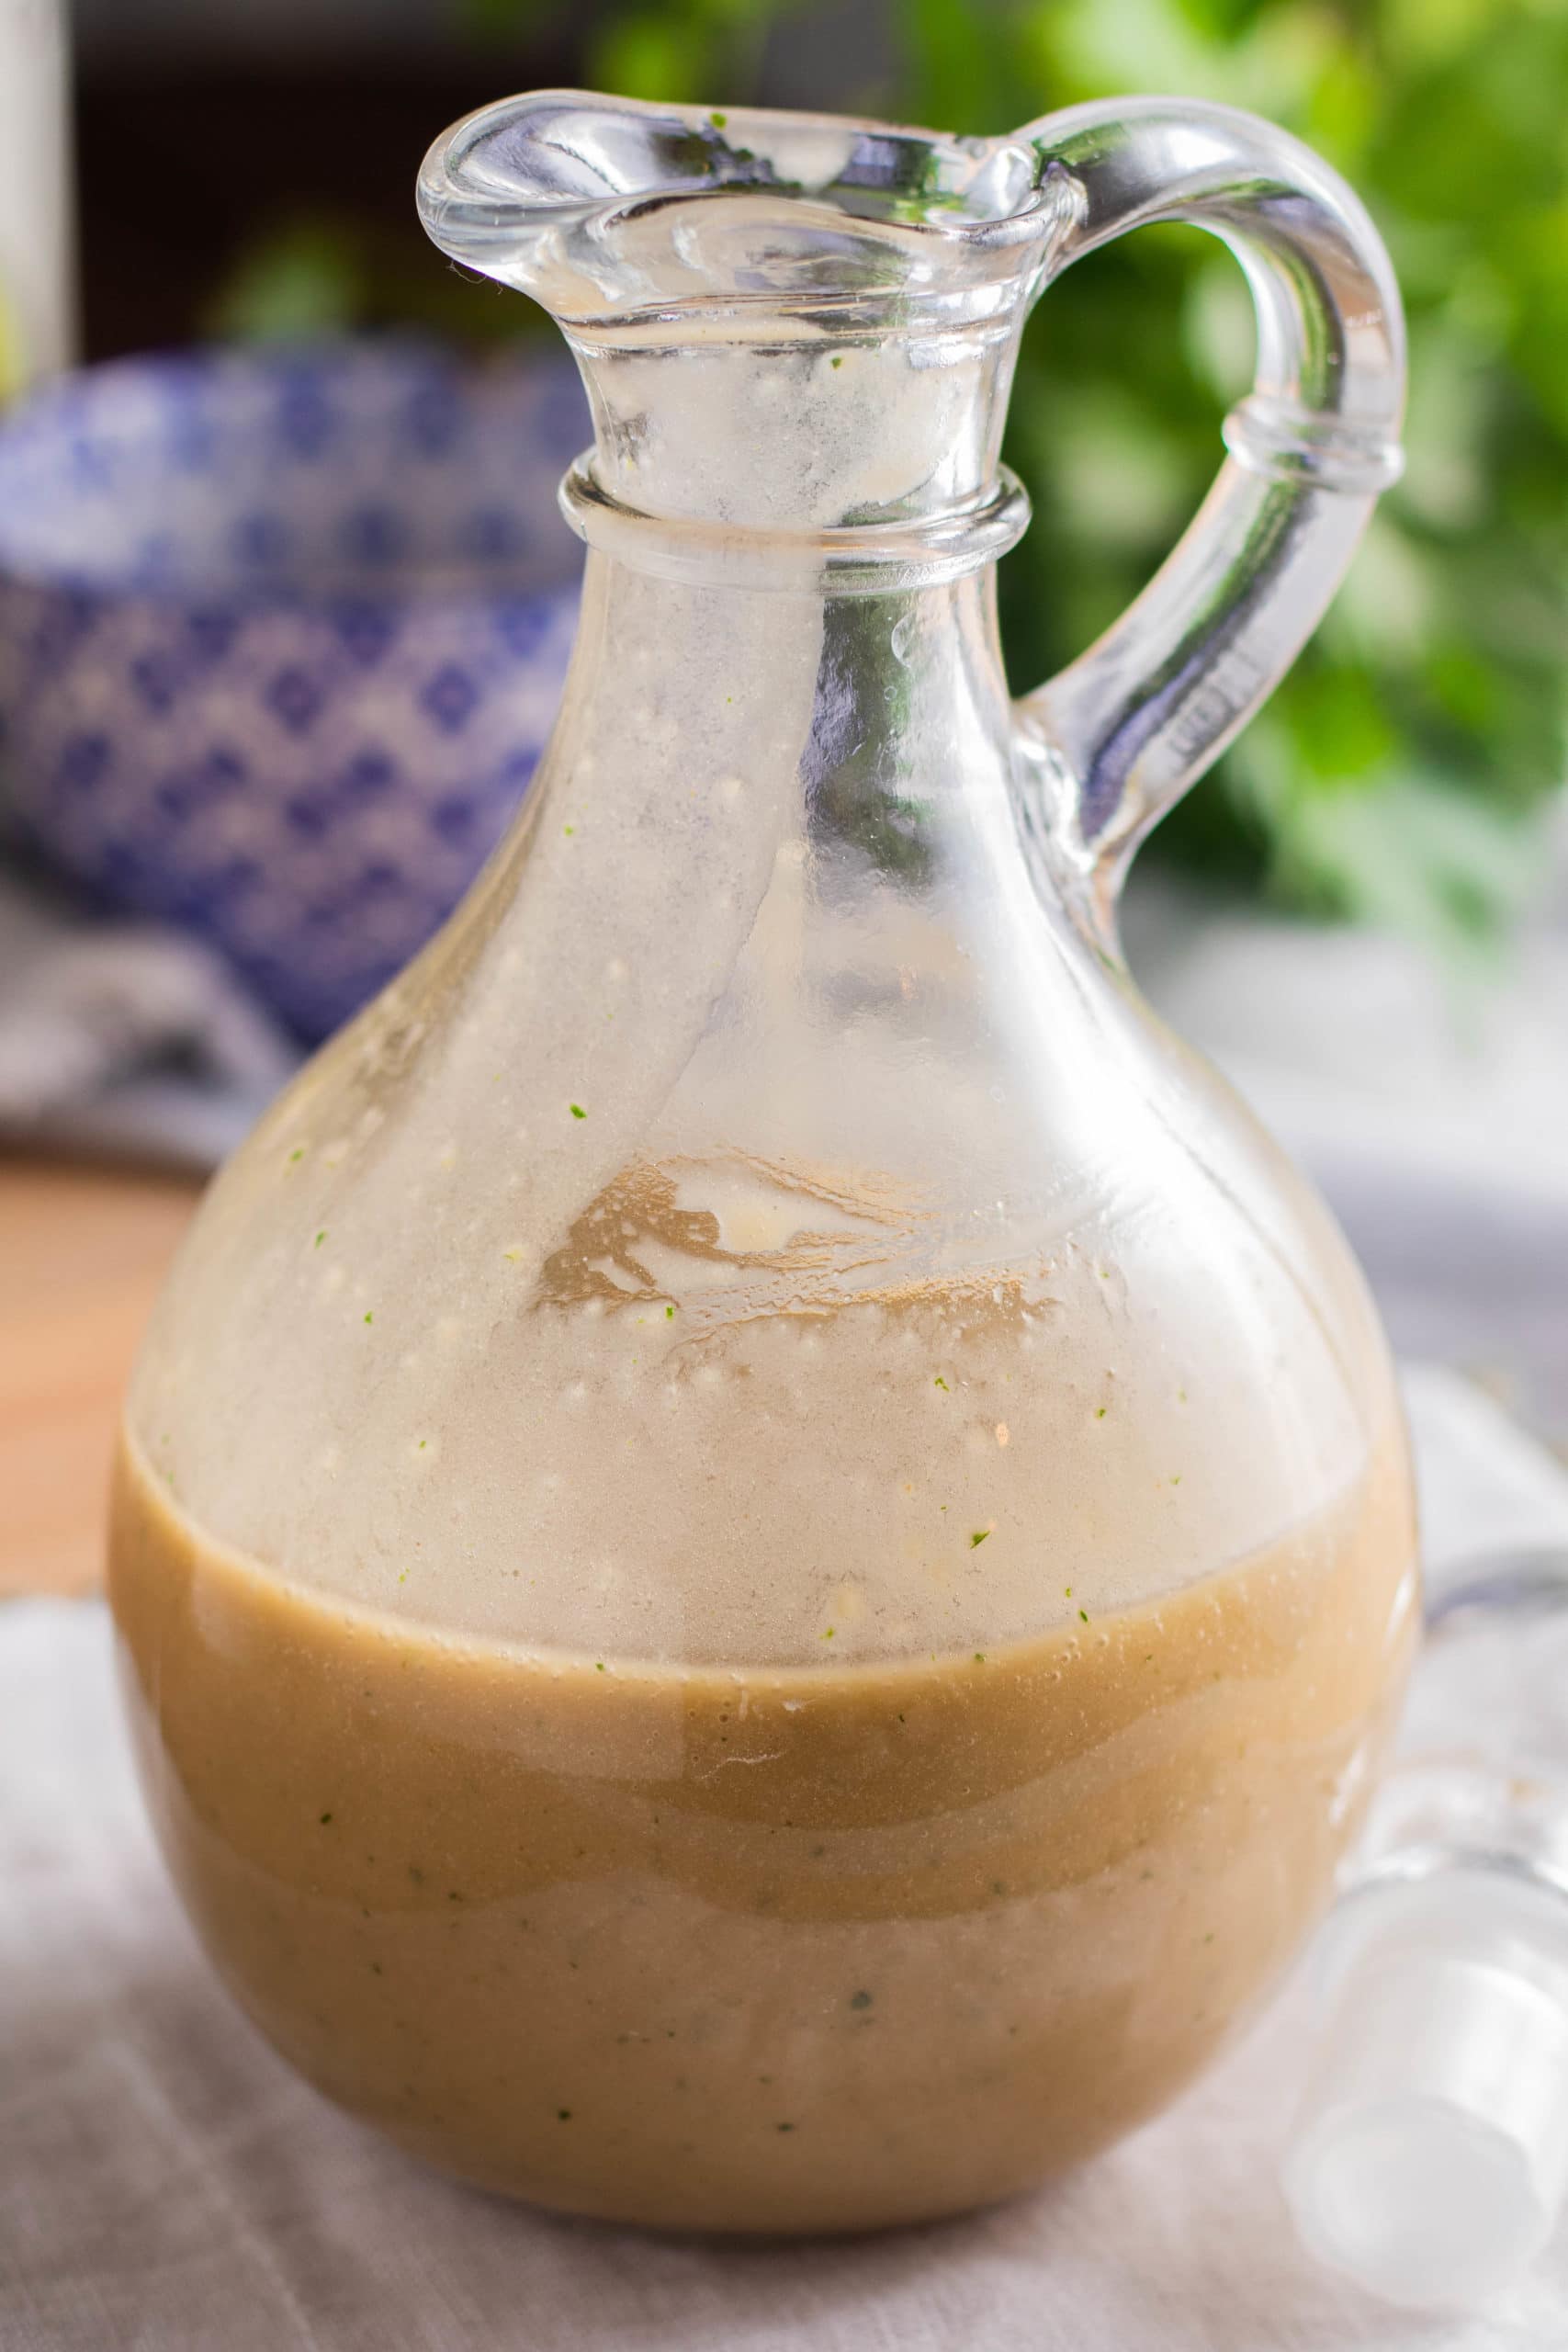 Homemade dijon vinaigrette salad dressing. Only 6 ingredients are needed to make this homemade salad dressing. 